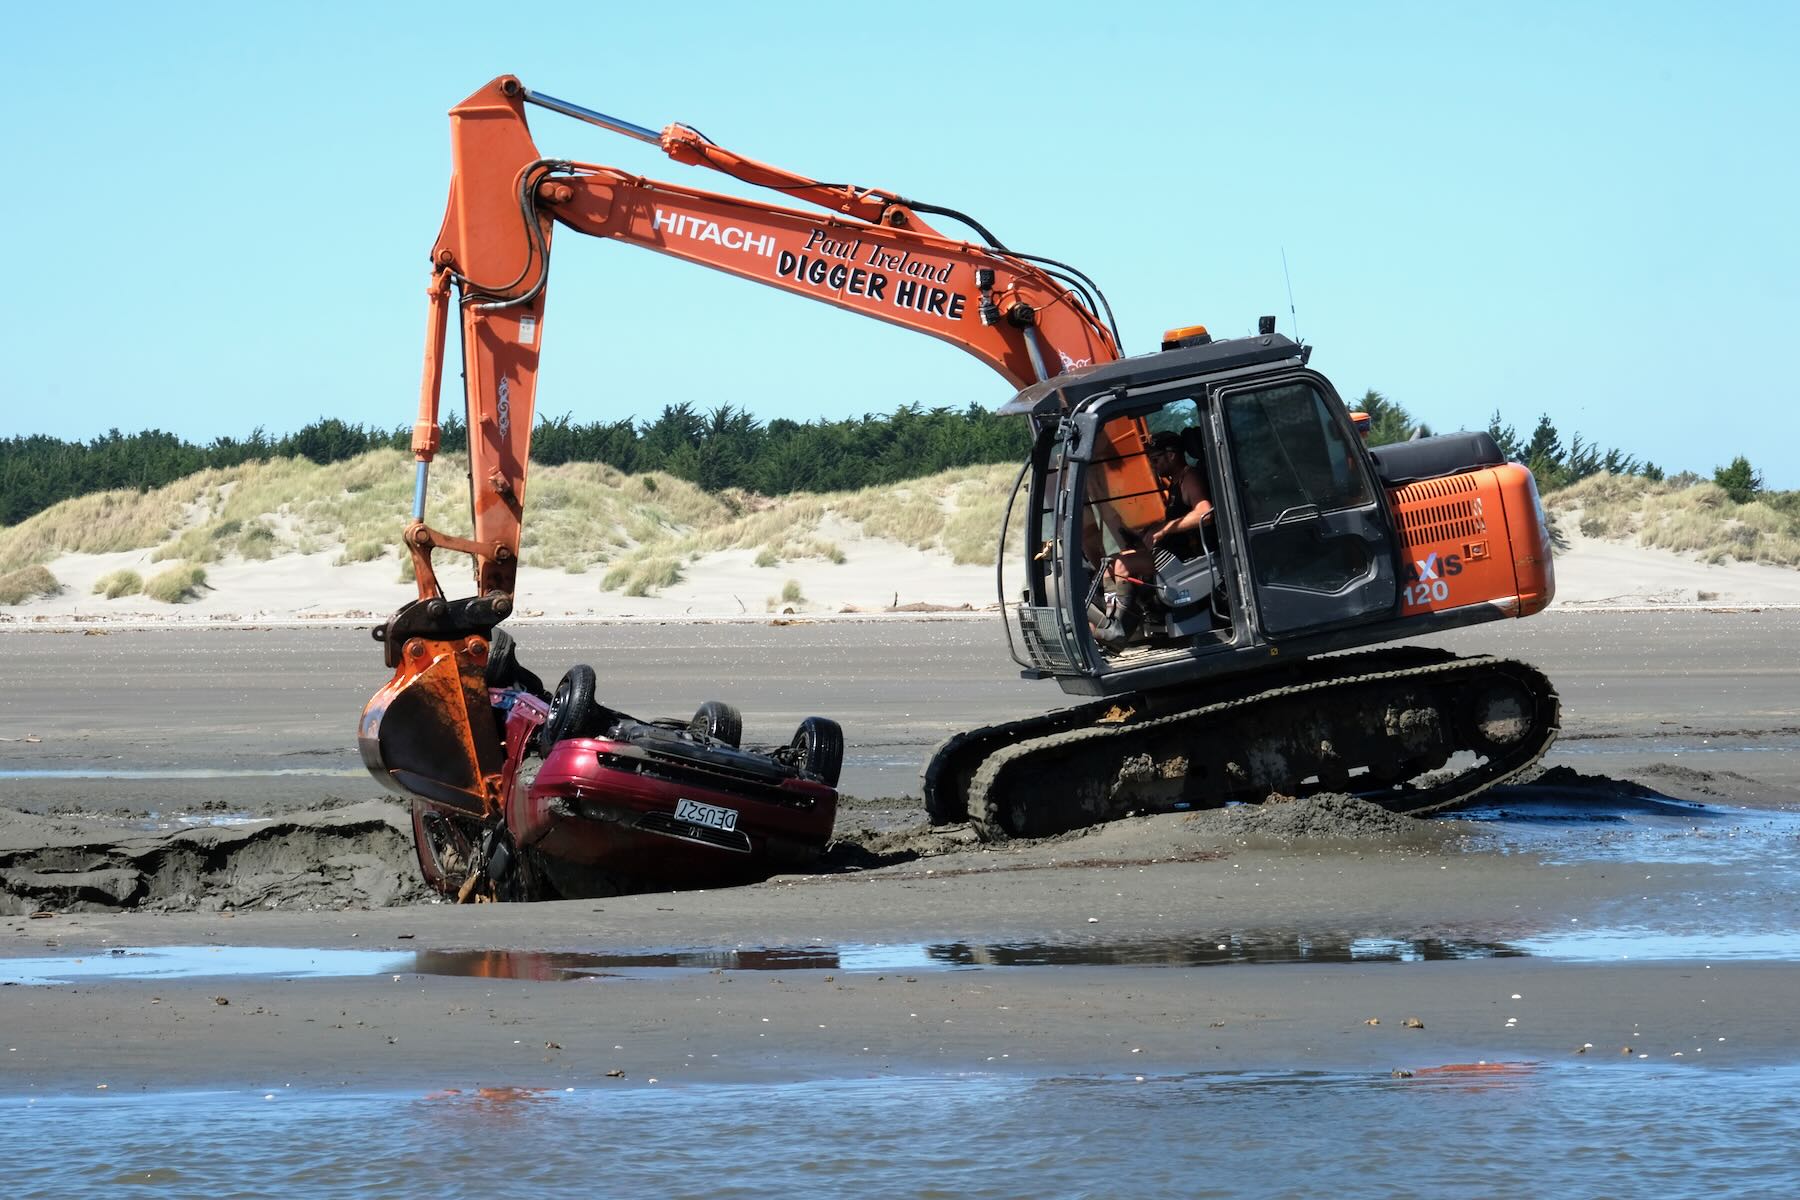 Digger removes abandoned car stuck in the sand, December 2020